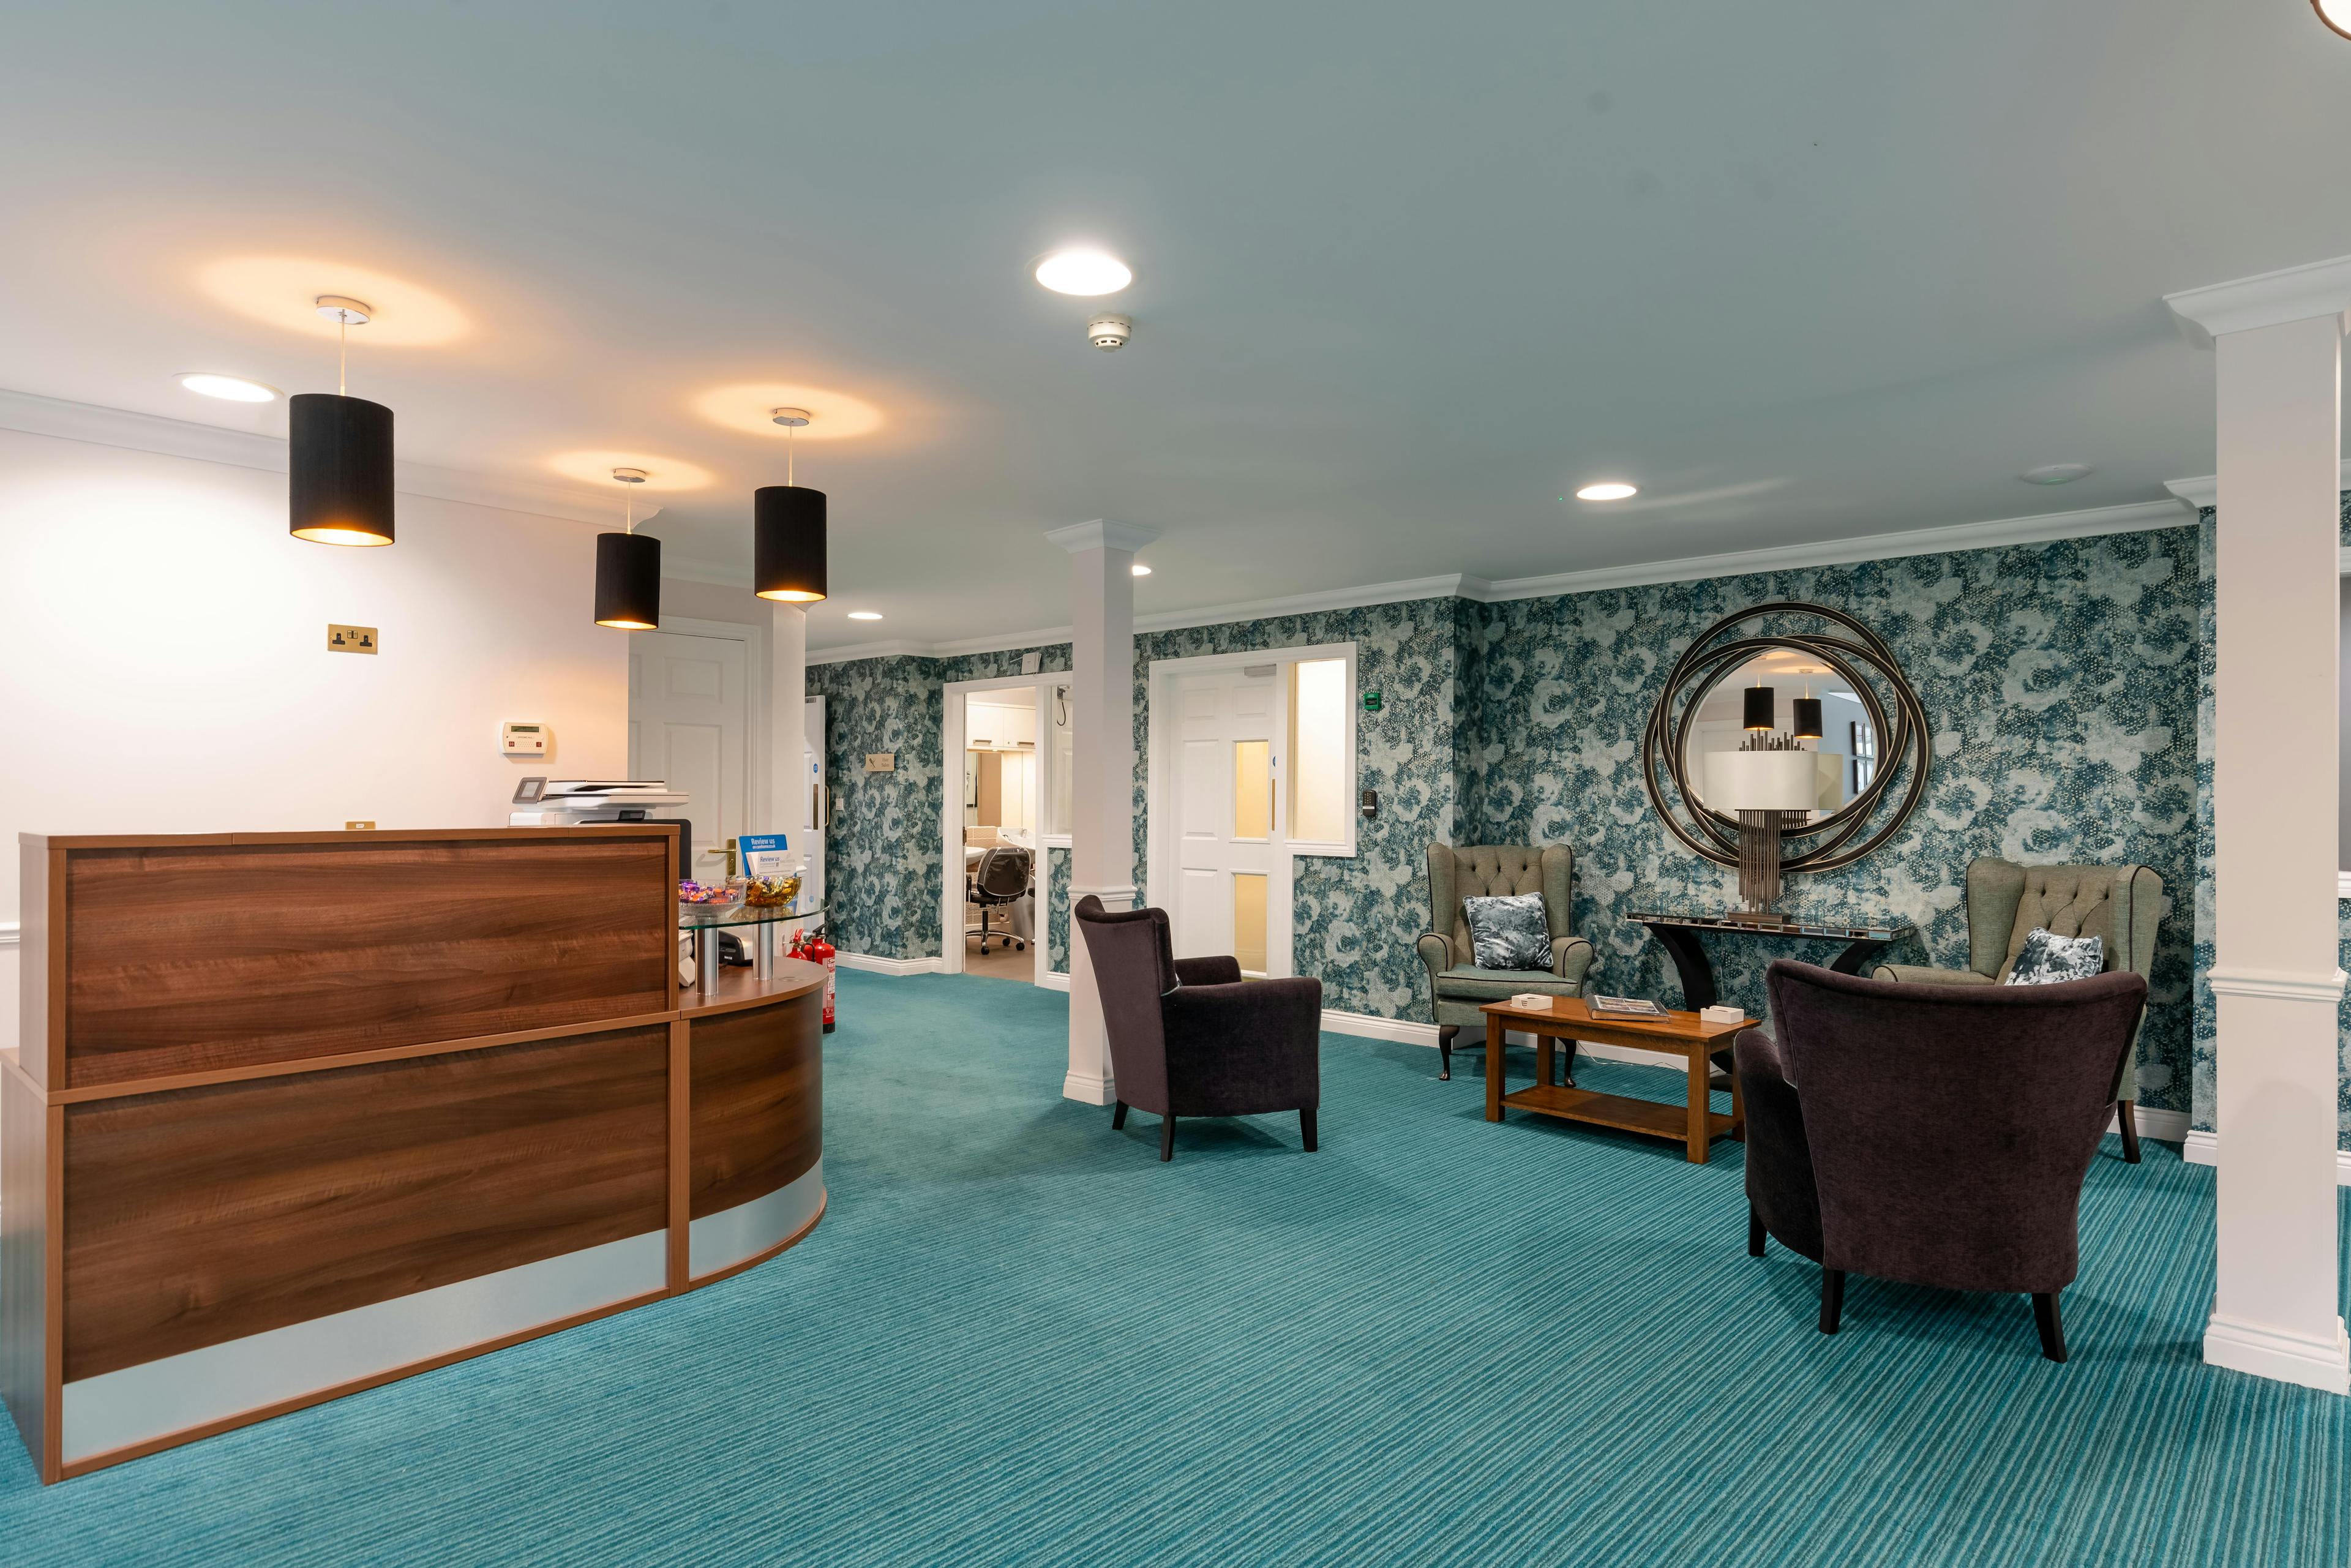 Reception at Tandridge Heights Care Home in Oxted, Surrey